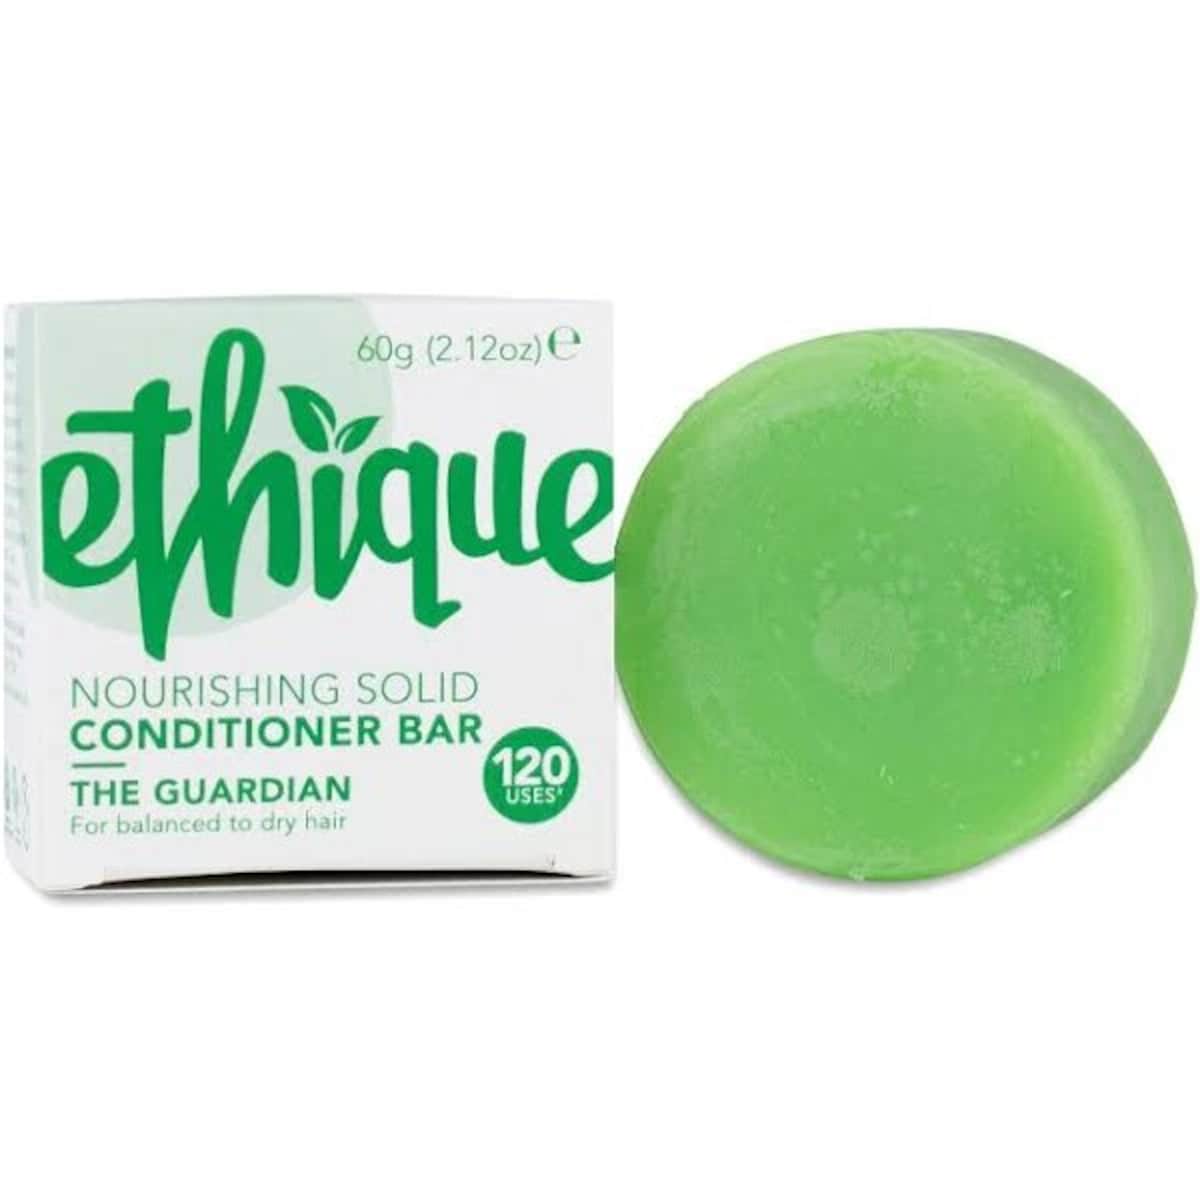 ETHIQUE Solid Conditioner Bar The Guardian Normal or Dry Hair 60g